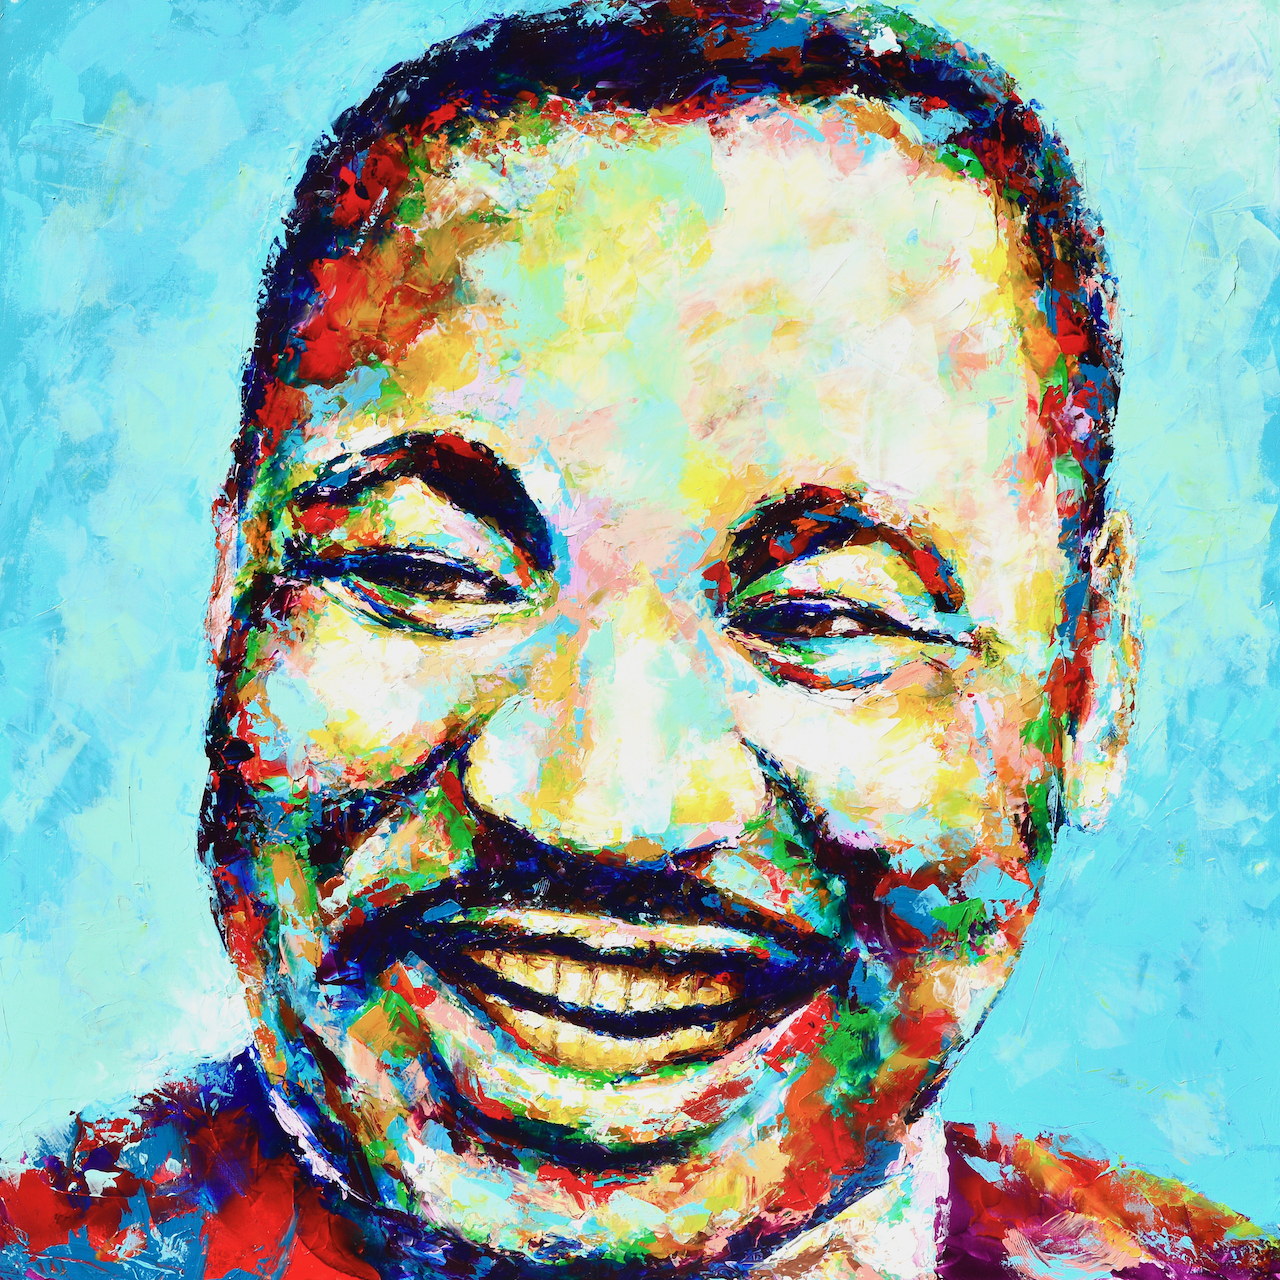 https://markphicreations.com/wp-content/uploads/2021/02/Martin-Luther-King-Jr-Painting-Mark-Phi-Creations-1.png